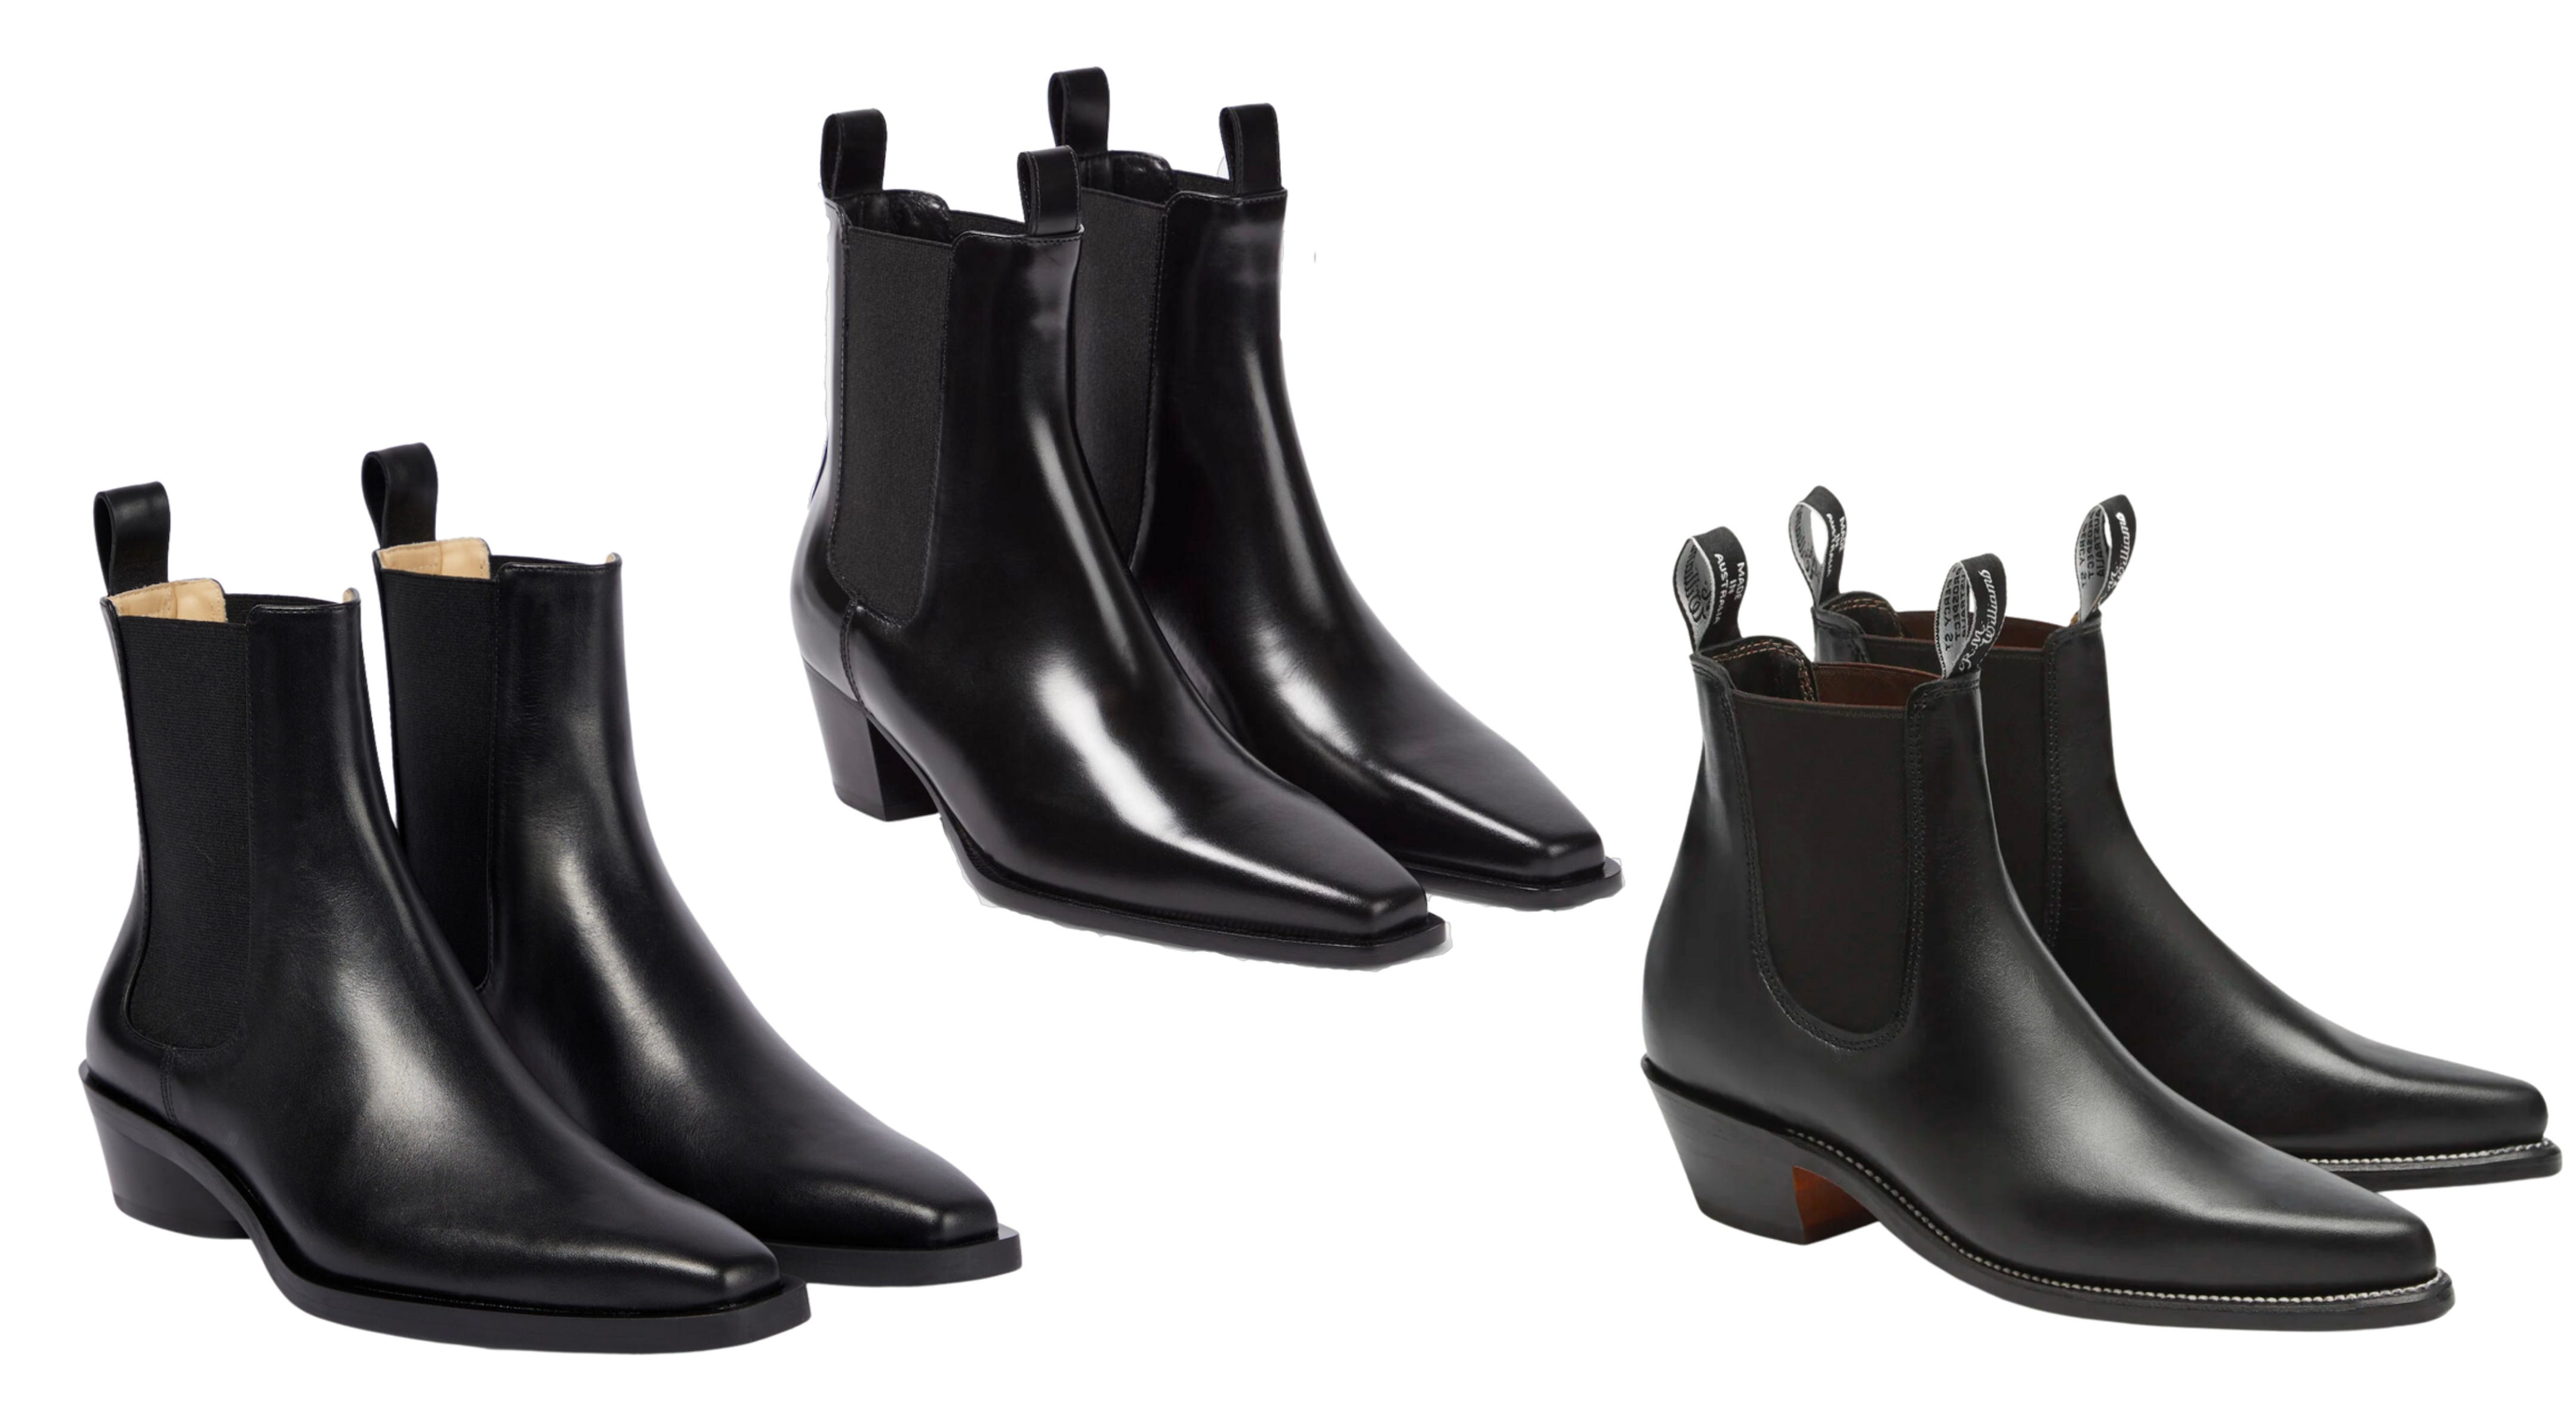 Are Tall Boots In Style? How To Wear Them To Look Current — The Wardrobe  Consultant